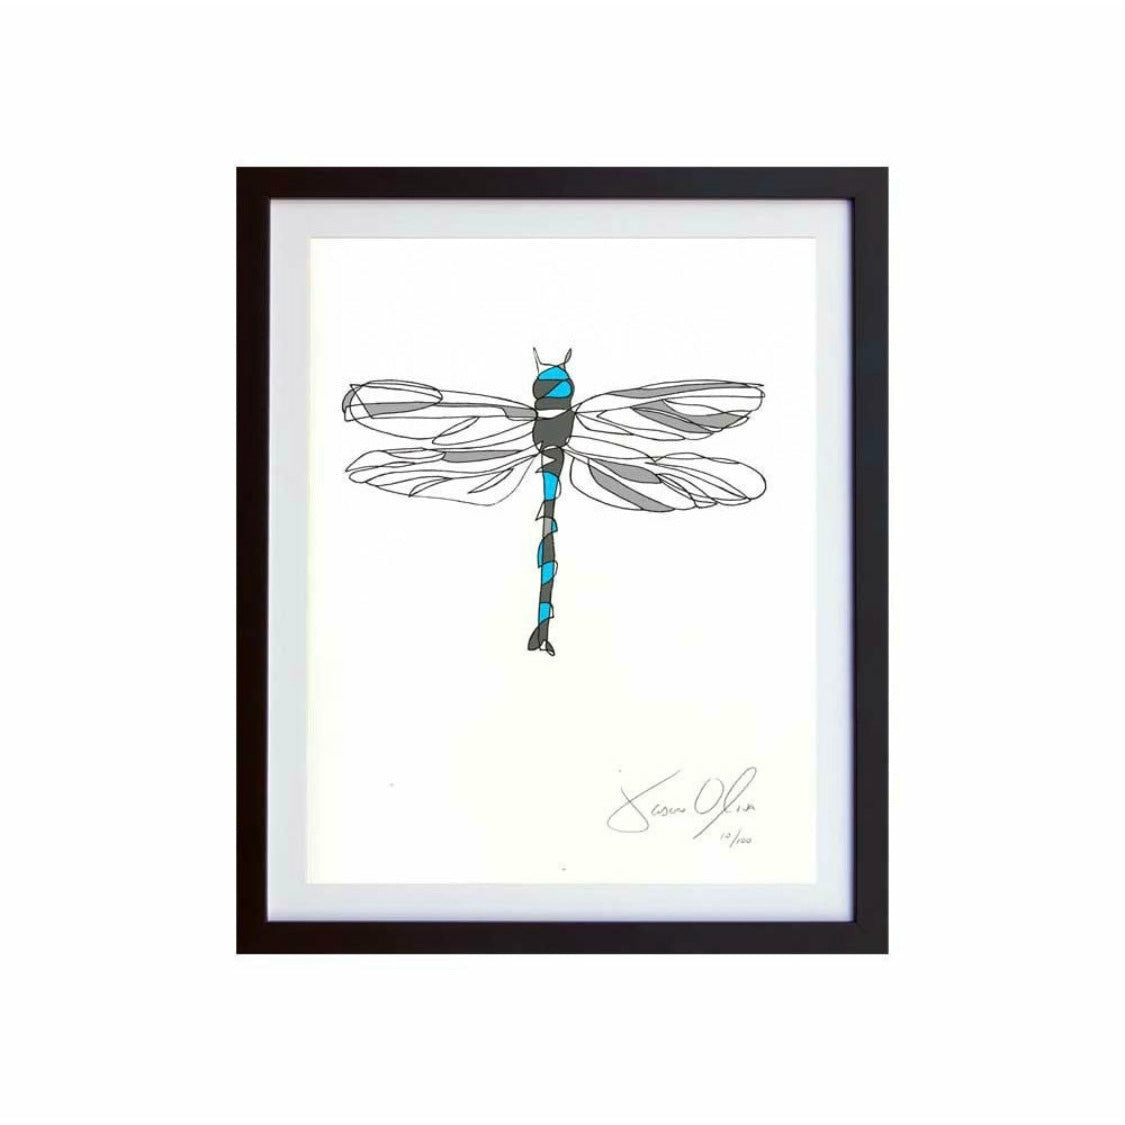 Dragonfly Color Medium Work on Paper 12/50 34"x26" by Jason Oliva - colletteconsignment.com